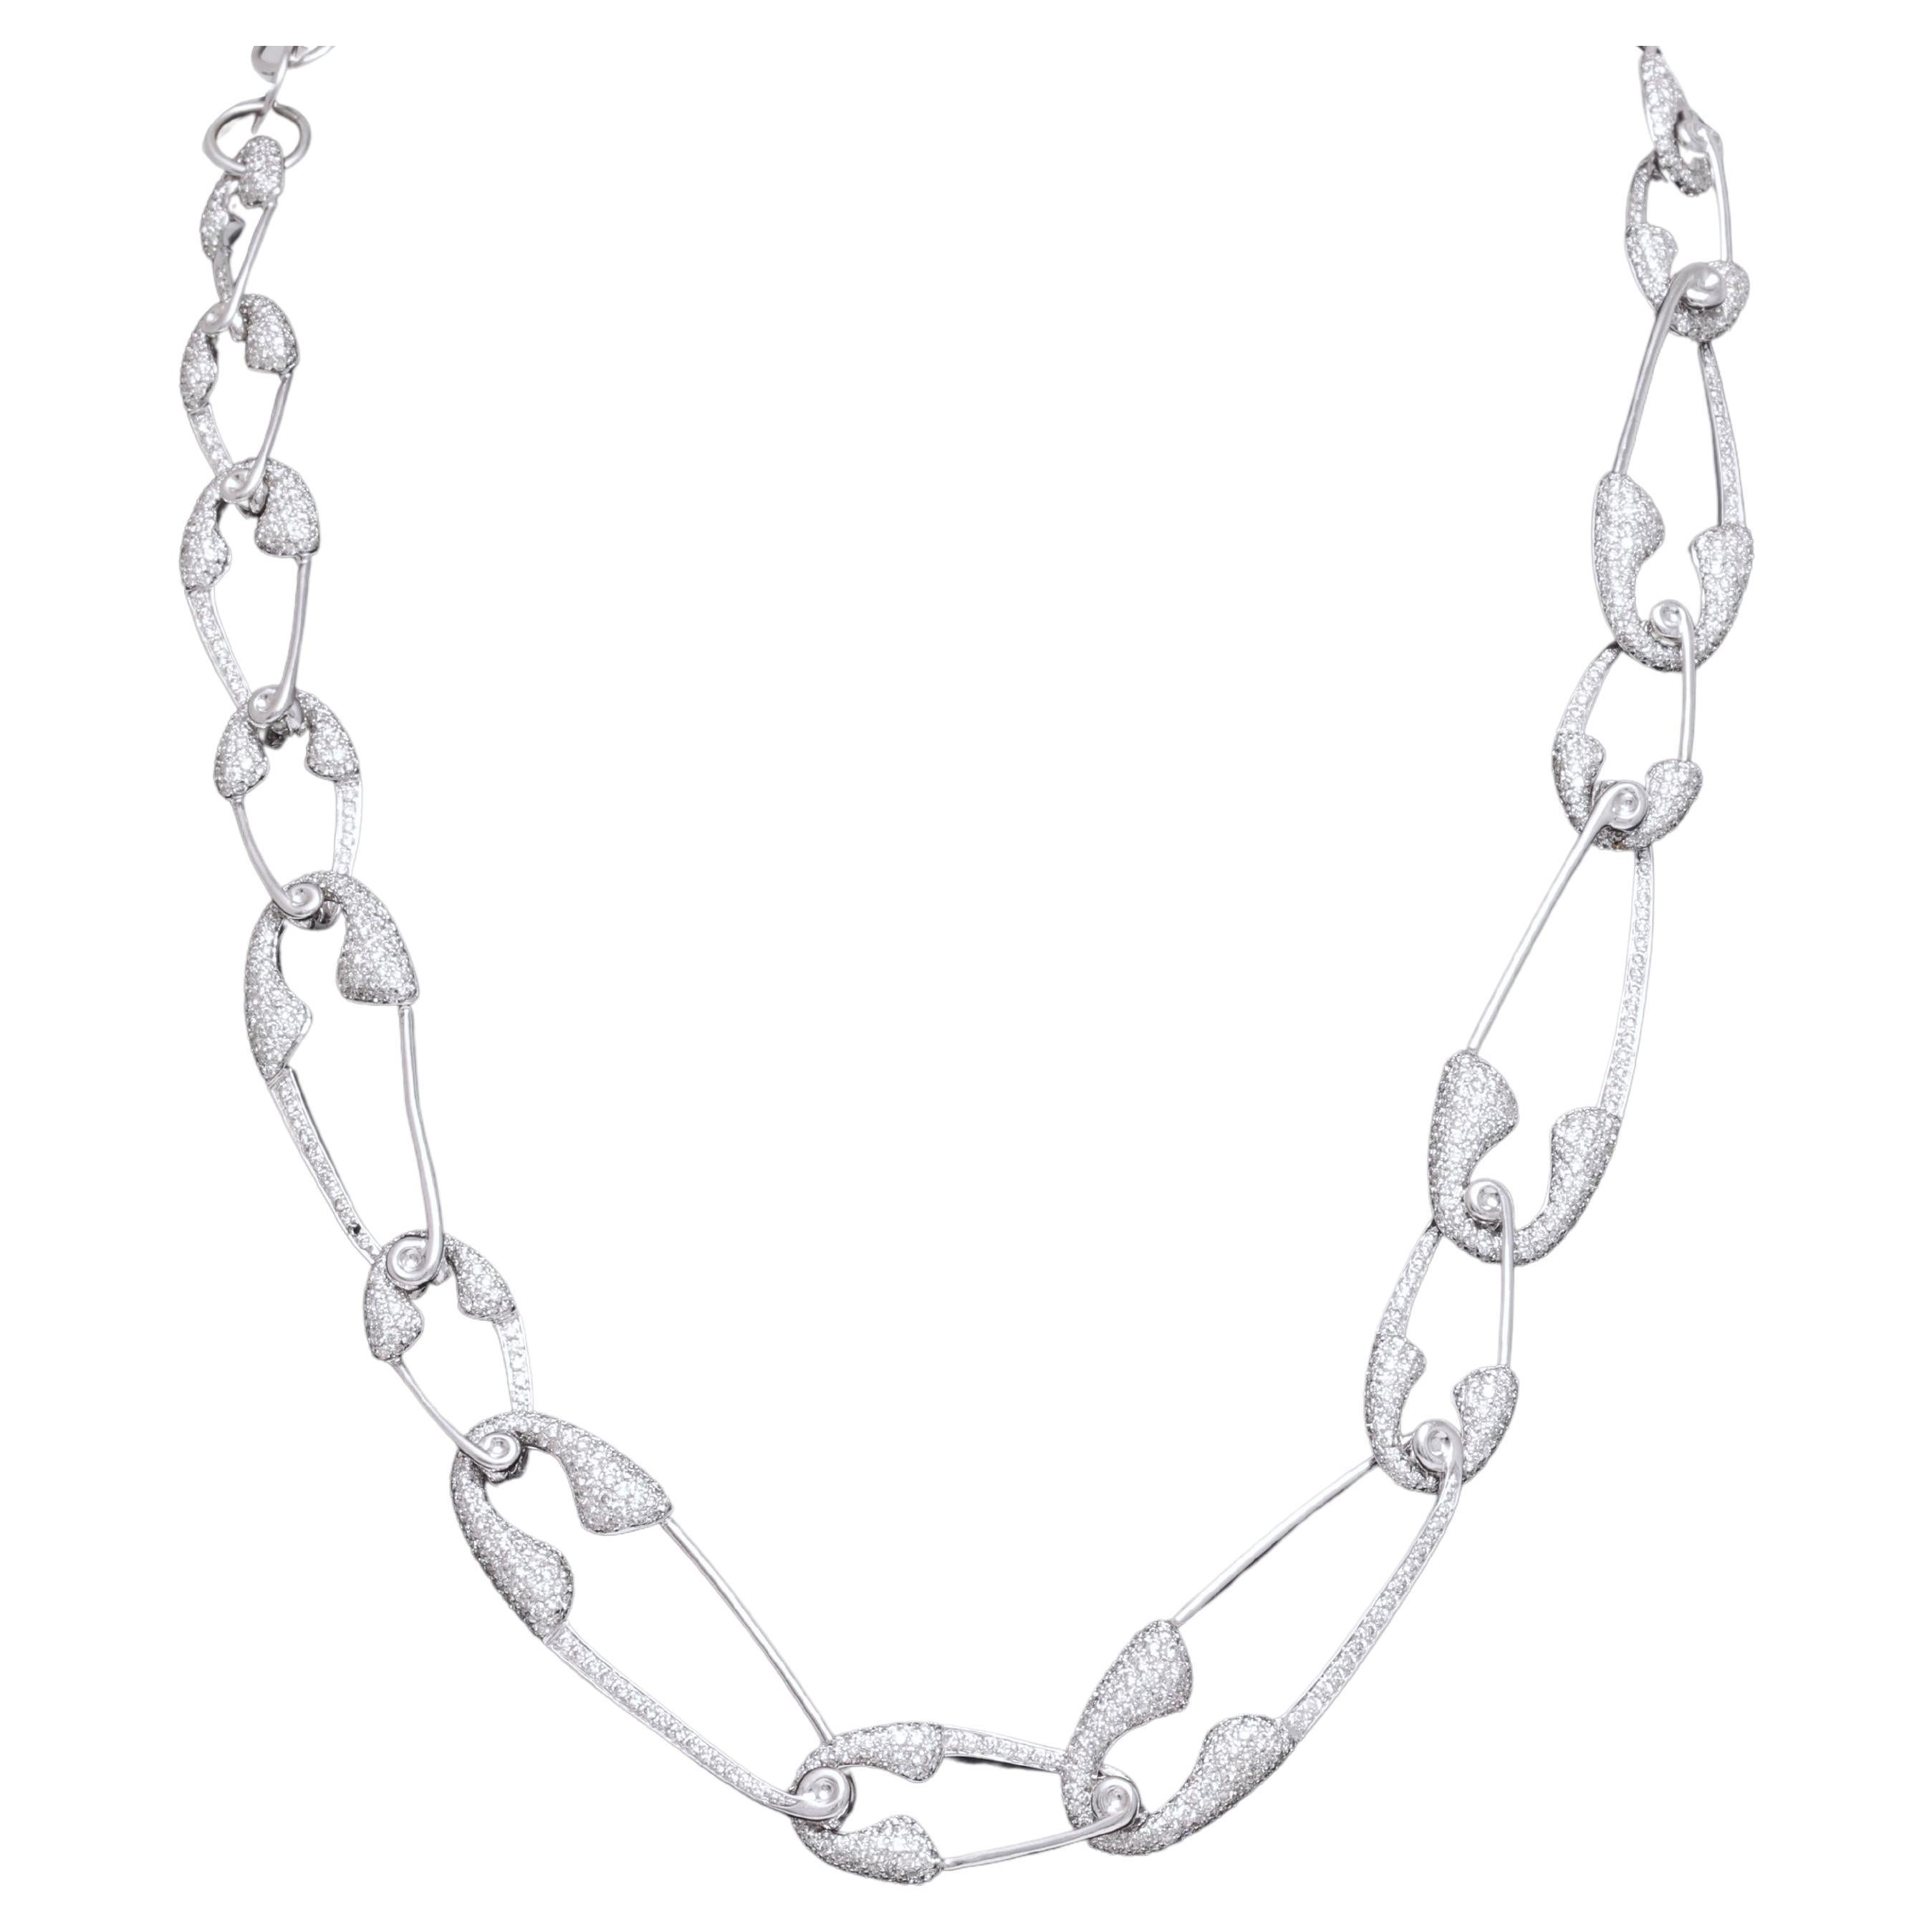 Fabulous 18 kt. White Gold Interlocking Safety Pin Necklace With 5.6ct. Diamonds For Sale